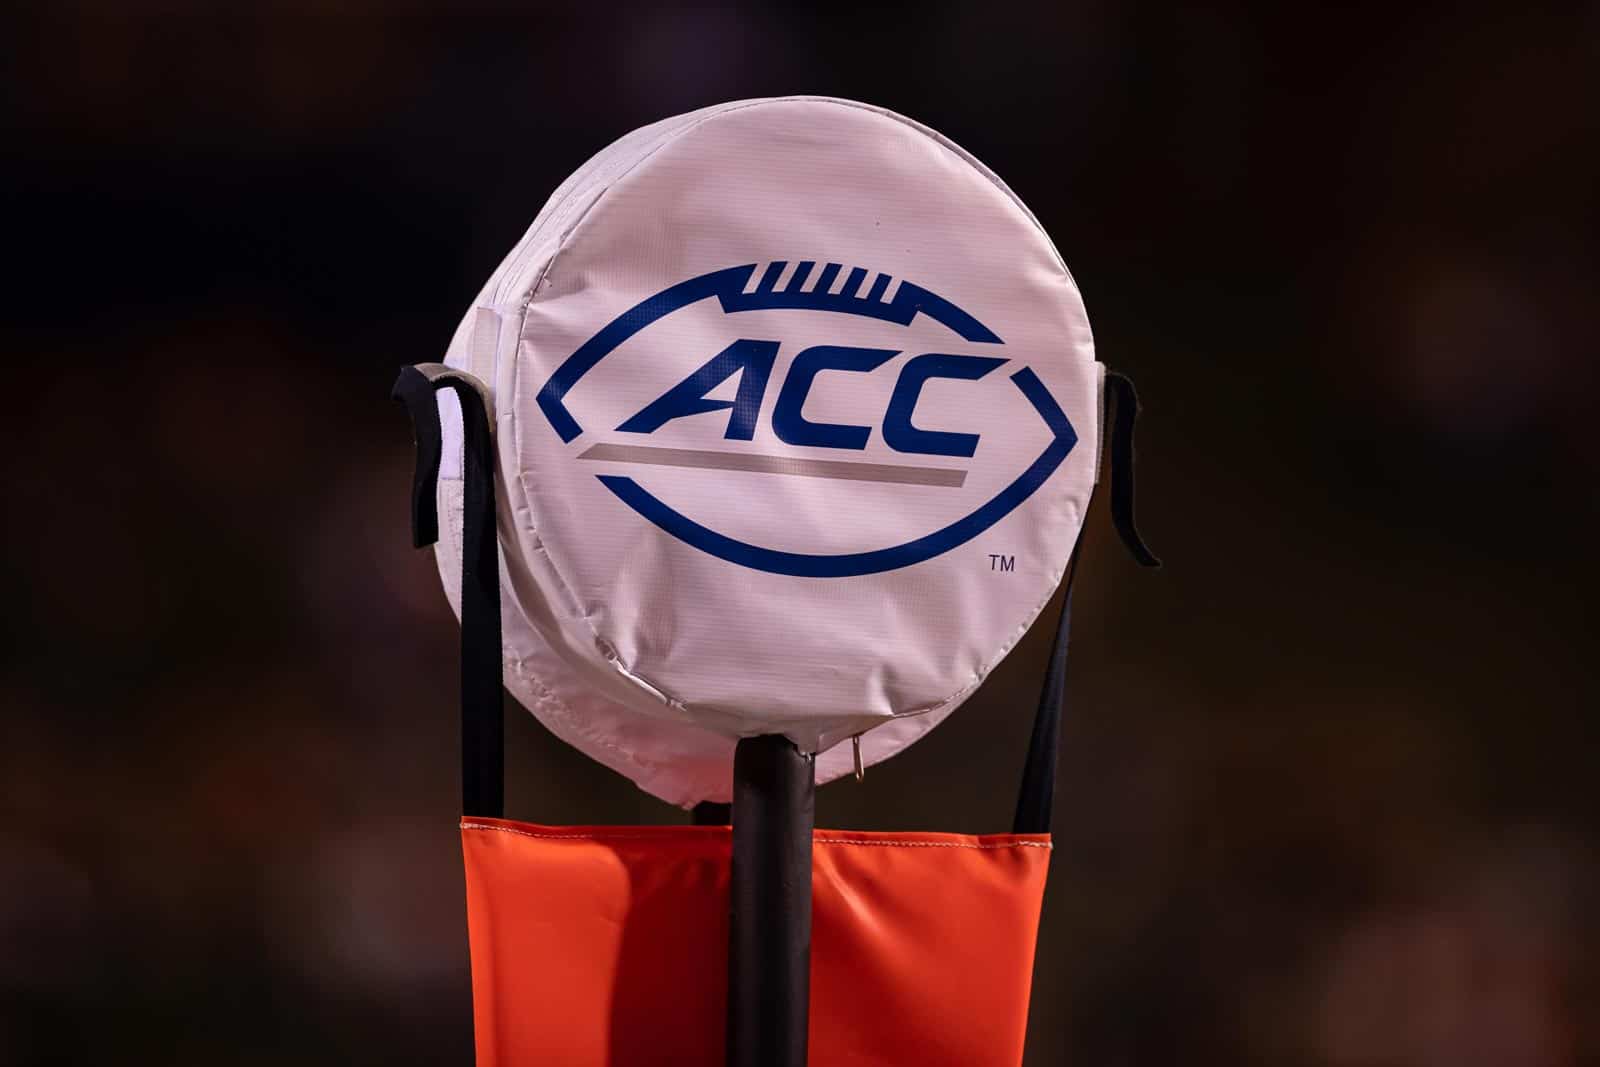 2022 ACC football schedule